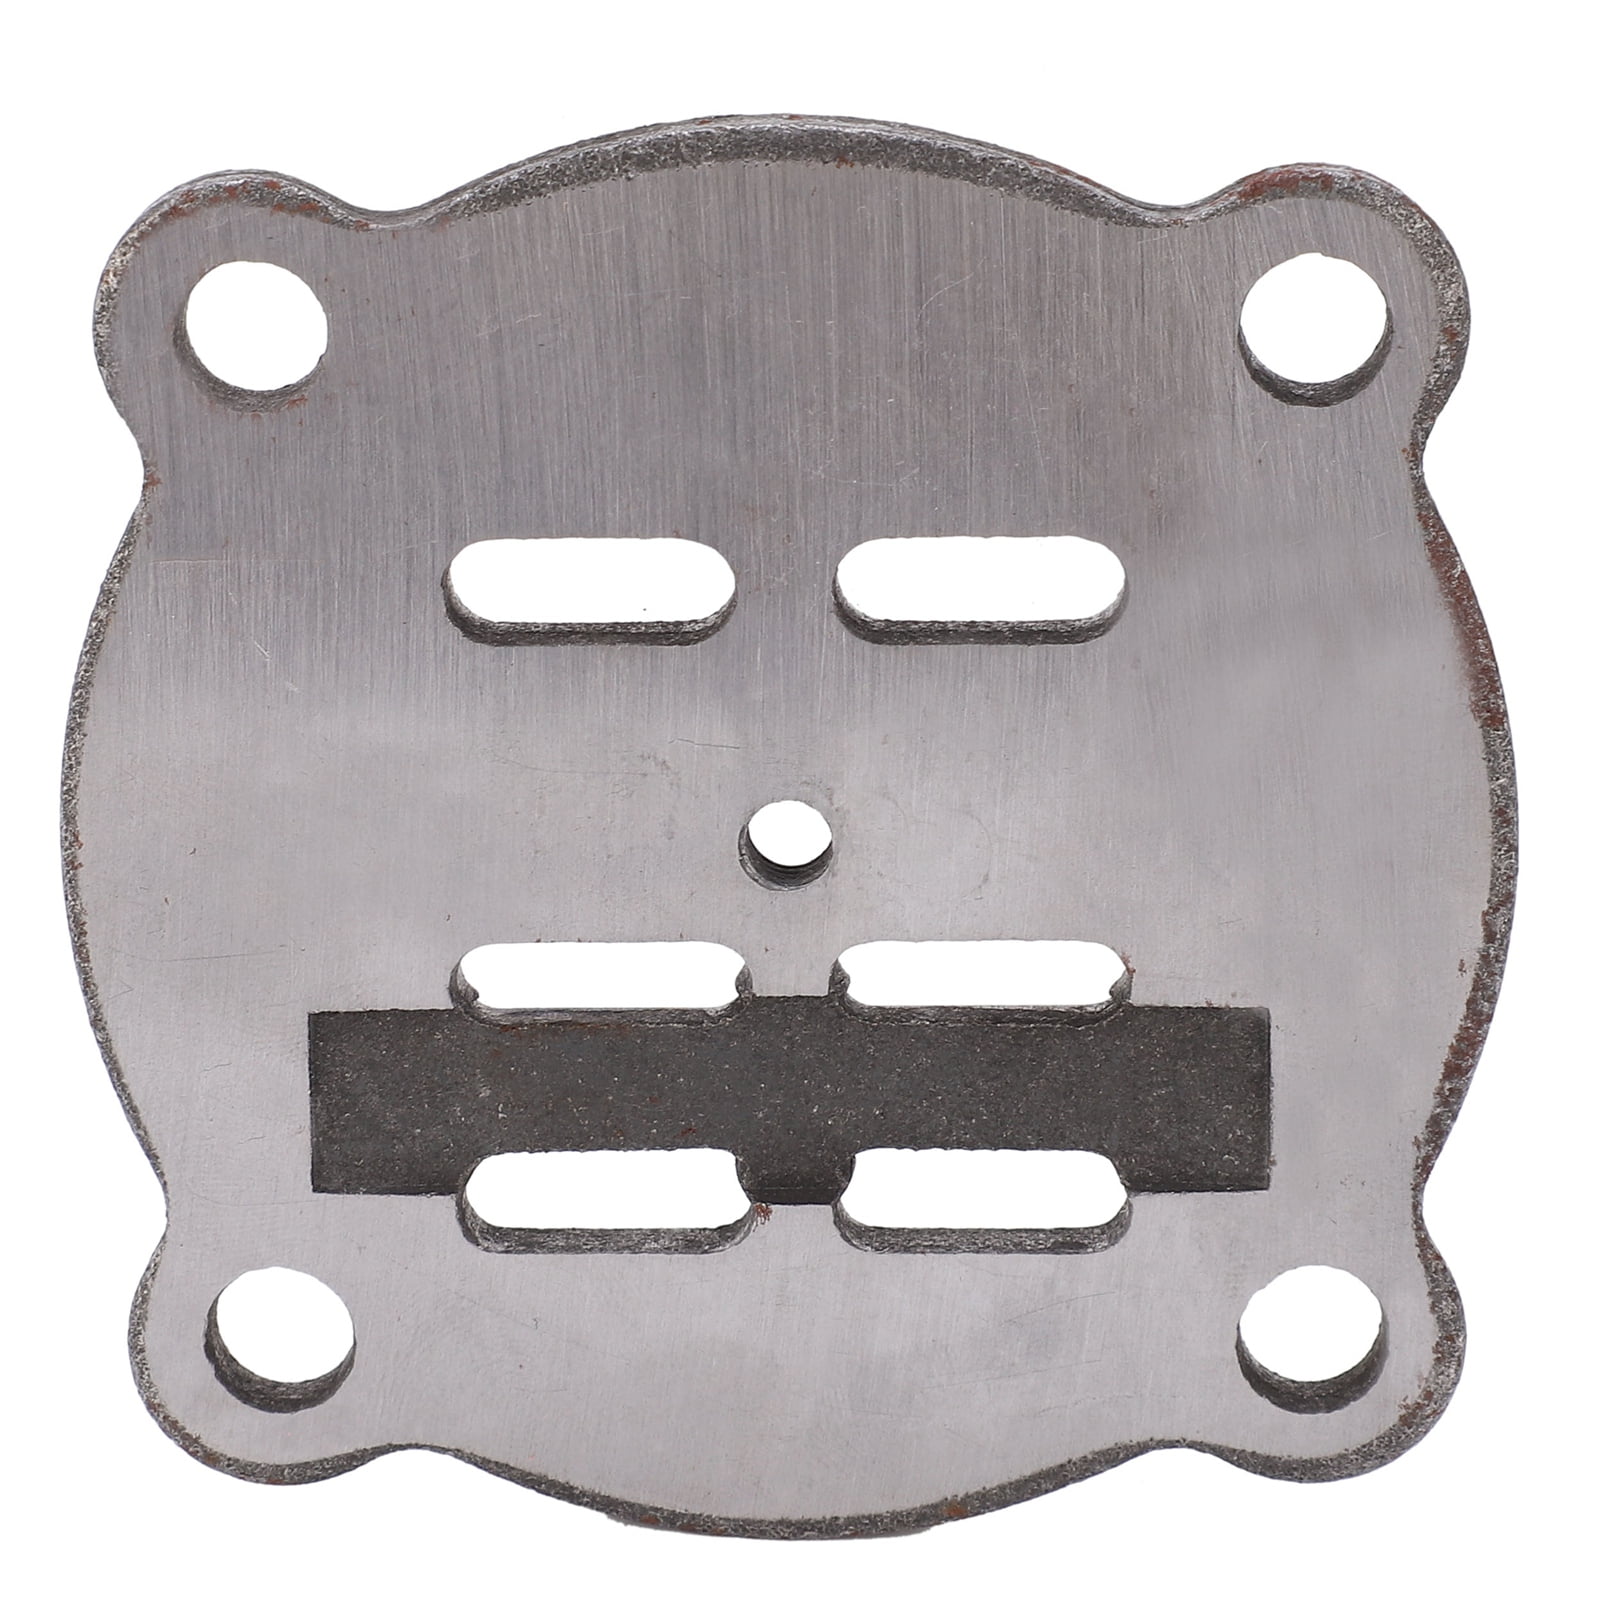 Bostitch Genuine OEM Replacement Valve Plate Assembly # AB-9429999 